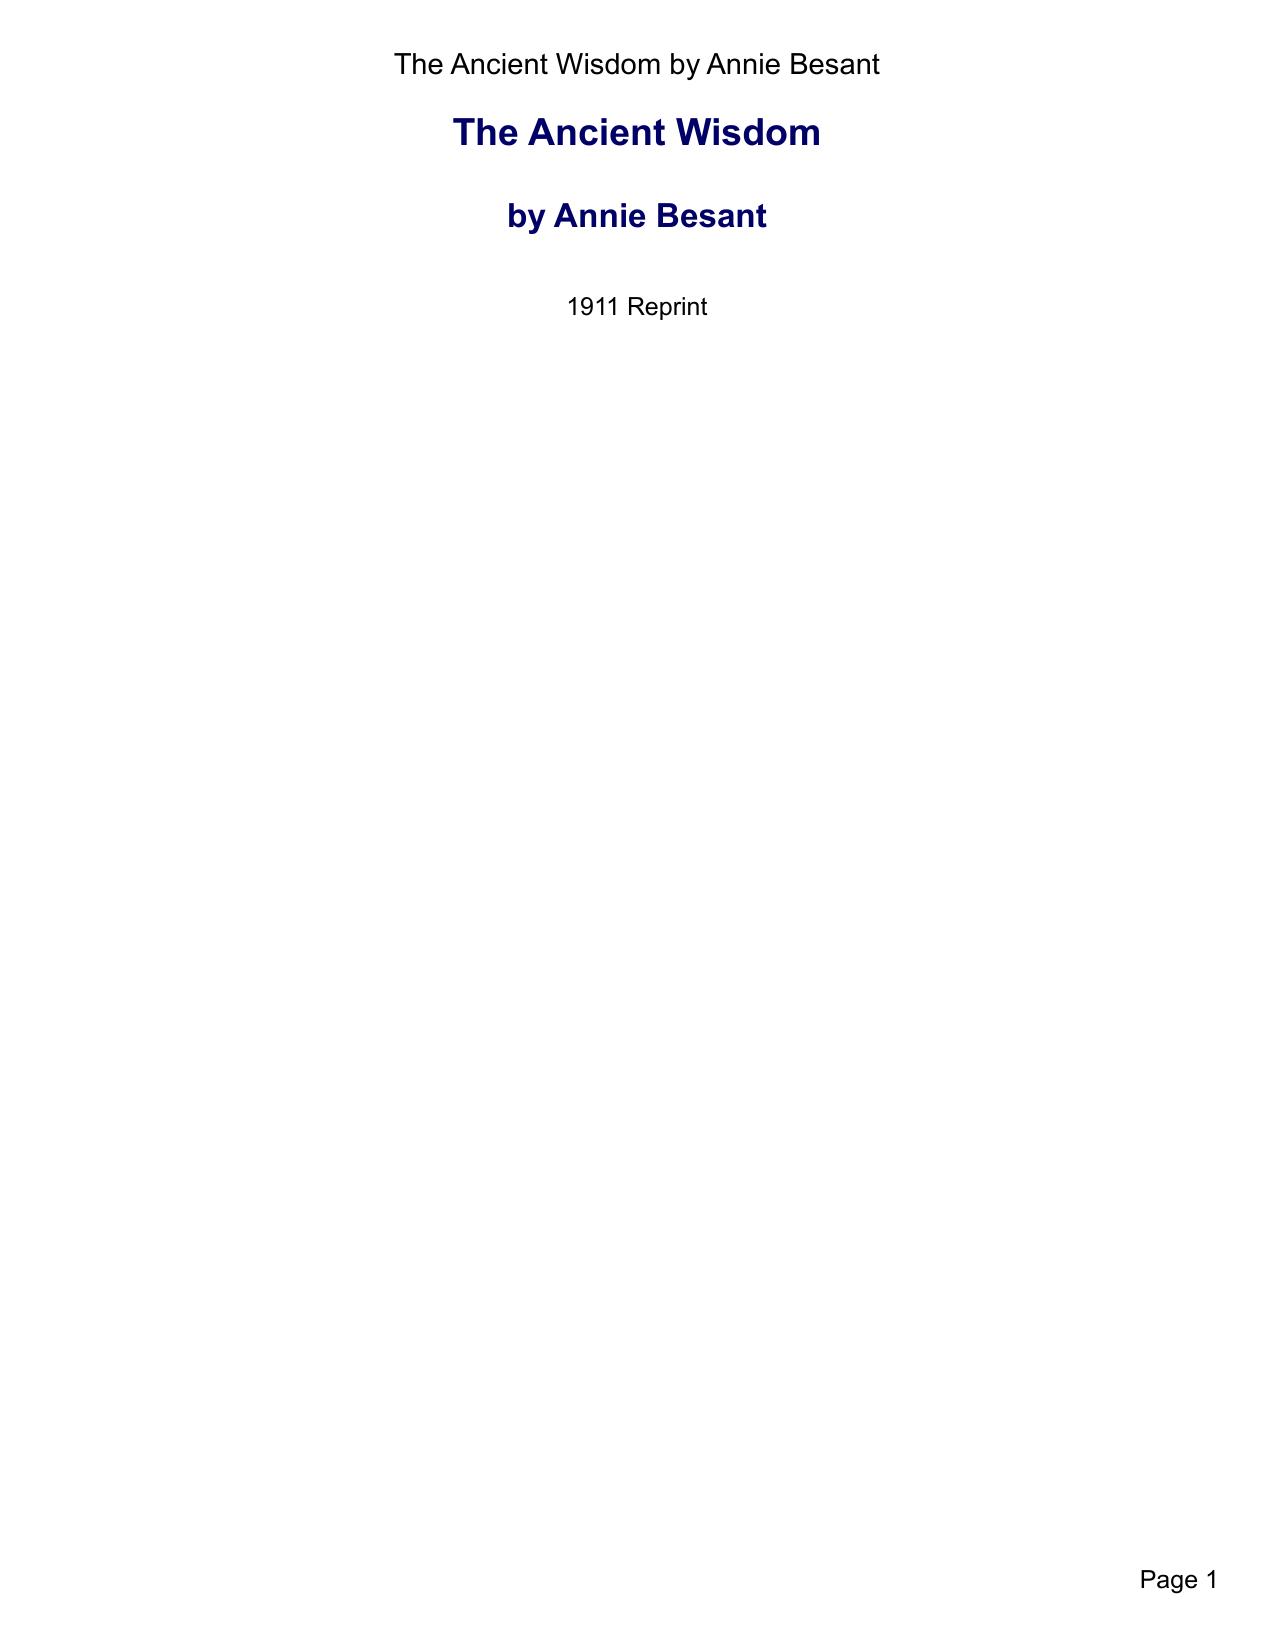 The Ancient Wisdom by Besant Annie